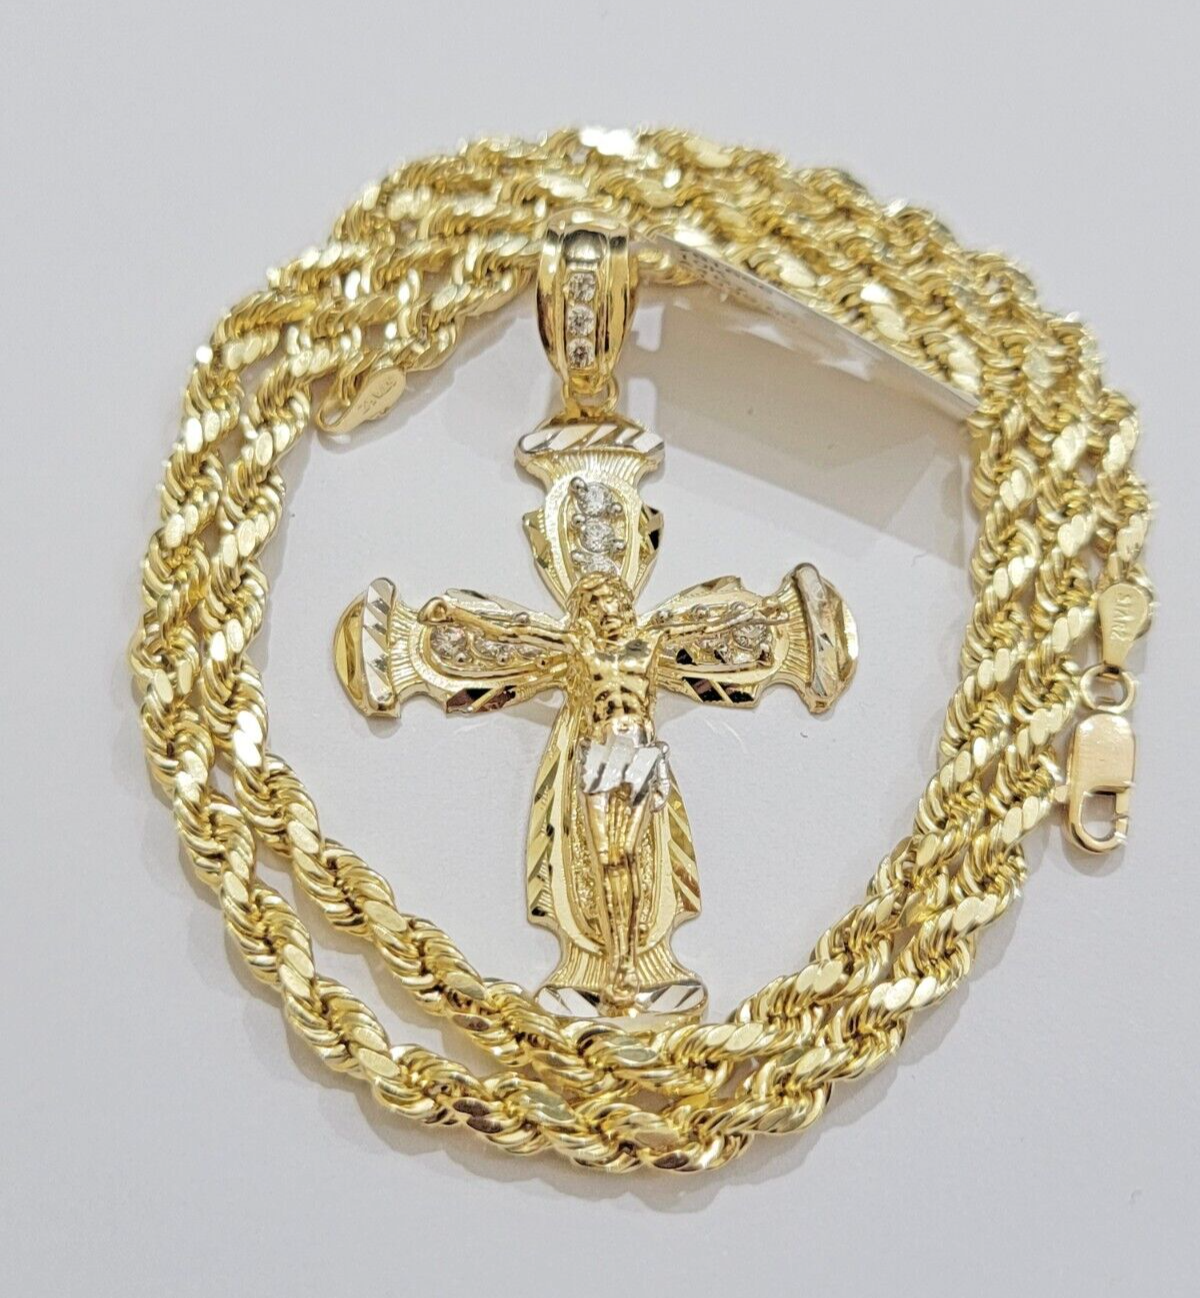 Real 10k Yellow Gold Cross Charm pendant Rope Chain Necklace 5mm 24" SET For Men